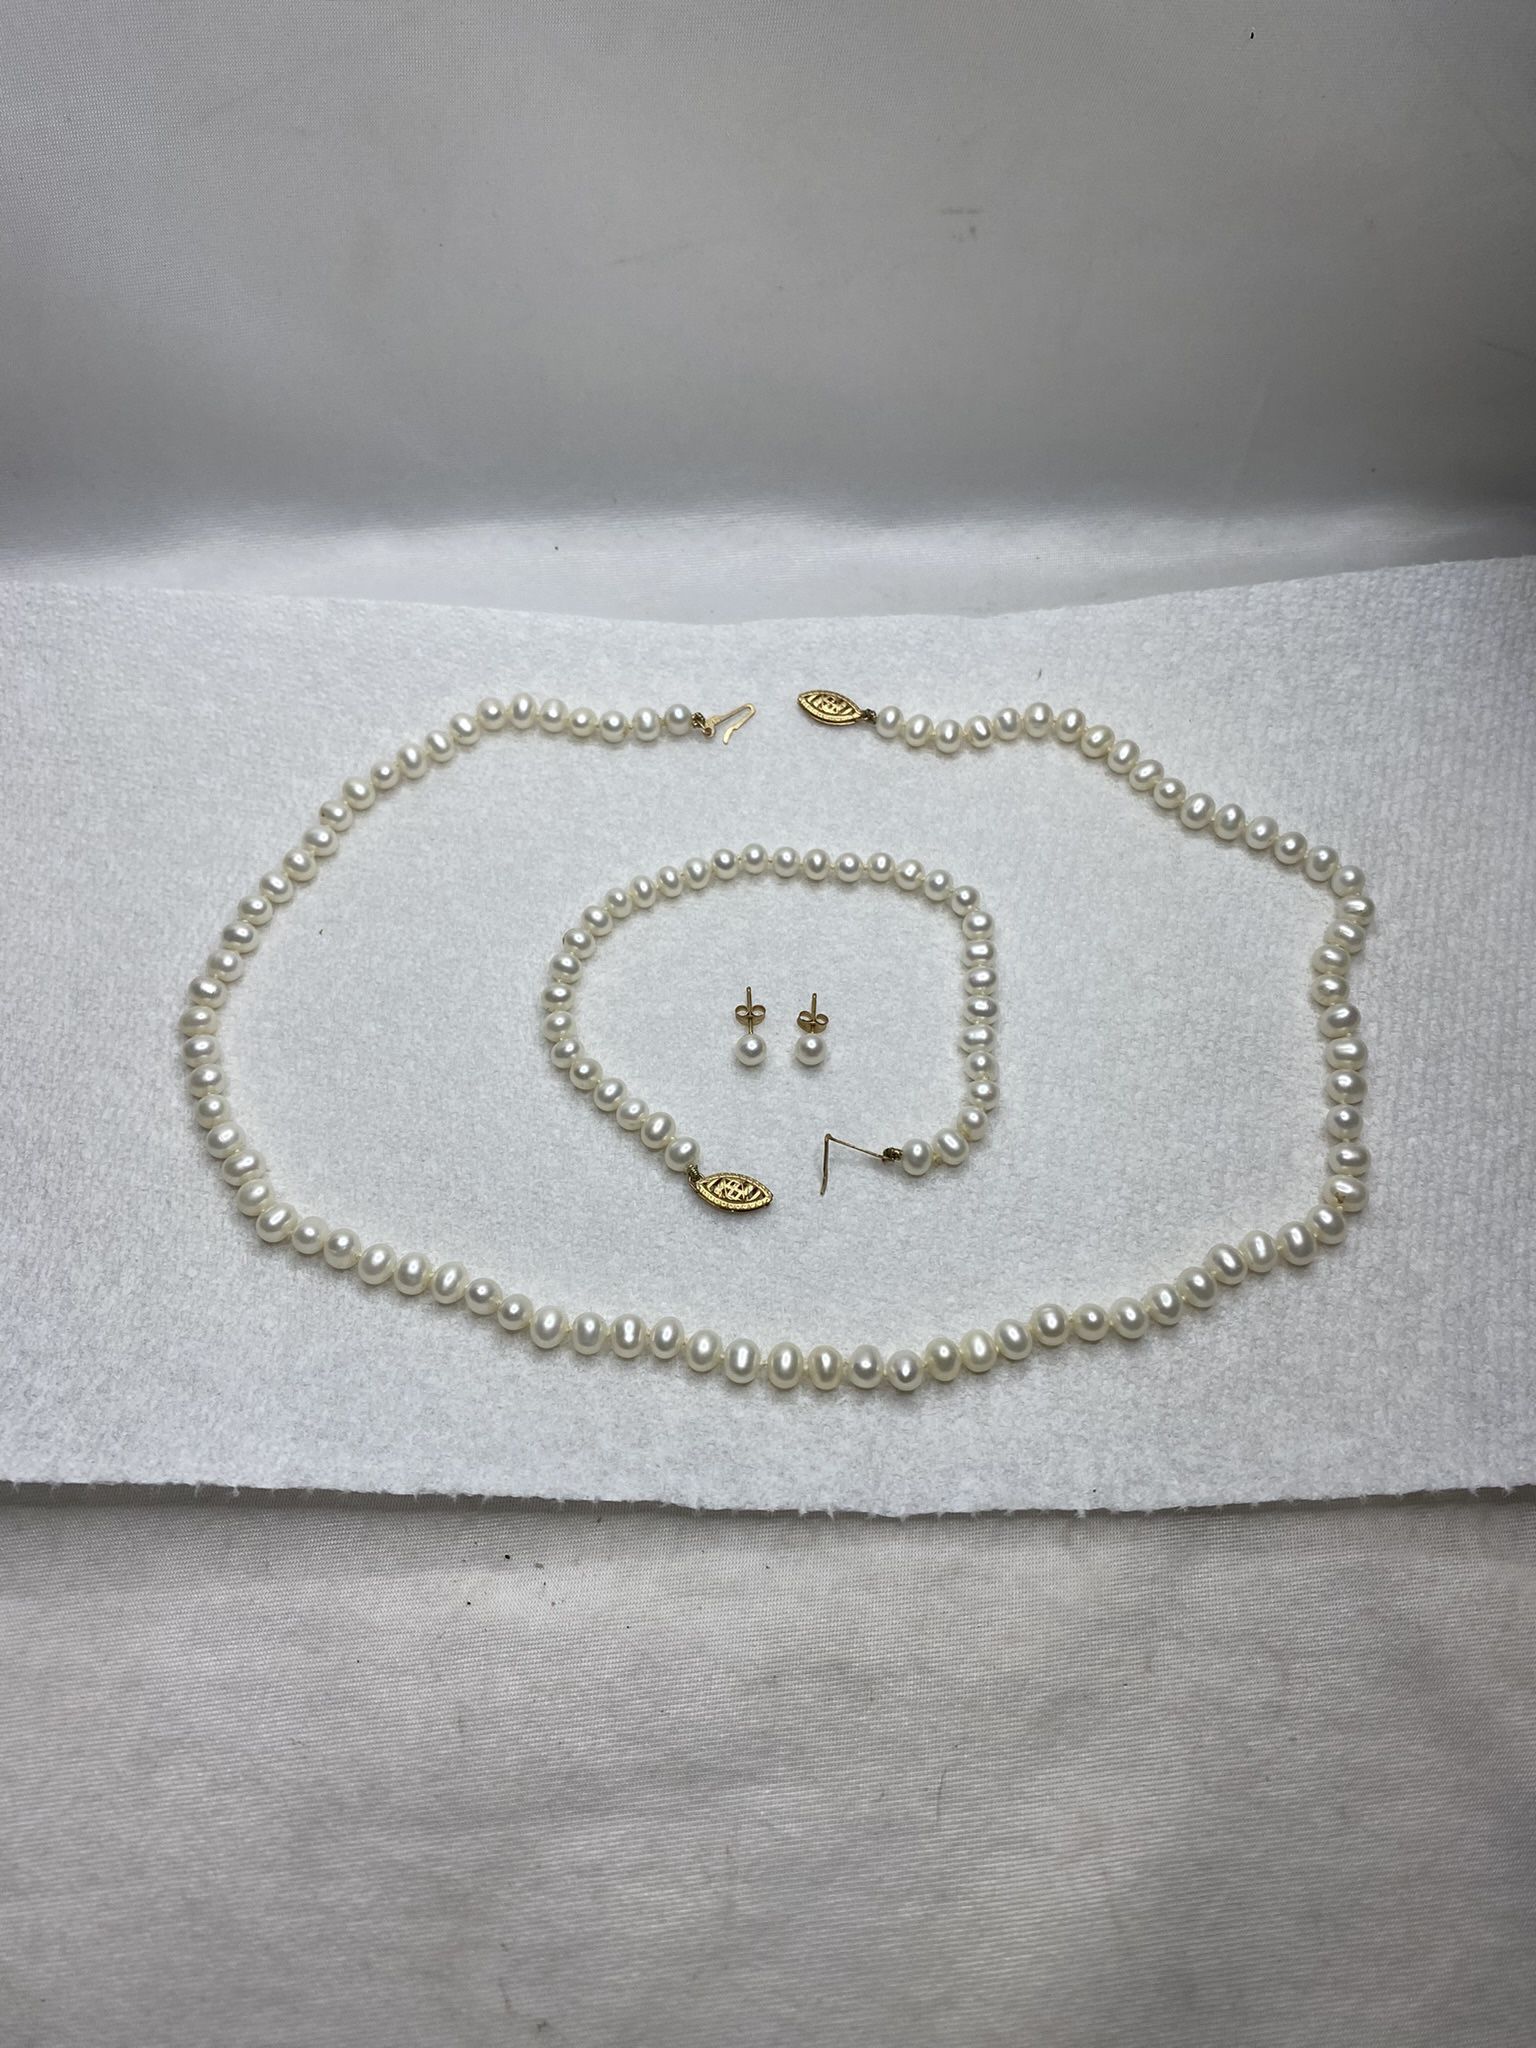 Cultured Freshwater Pearl Jewelry Set for Sale in Las Vegas, NV - OfferUp